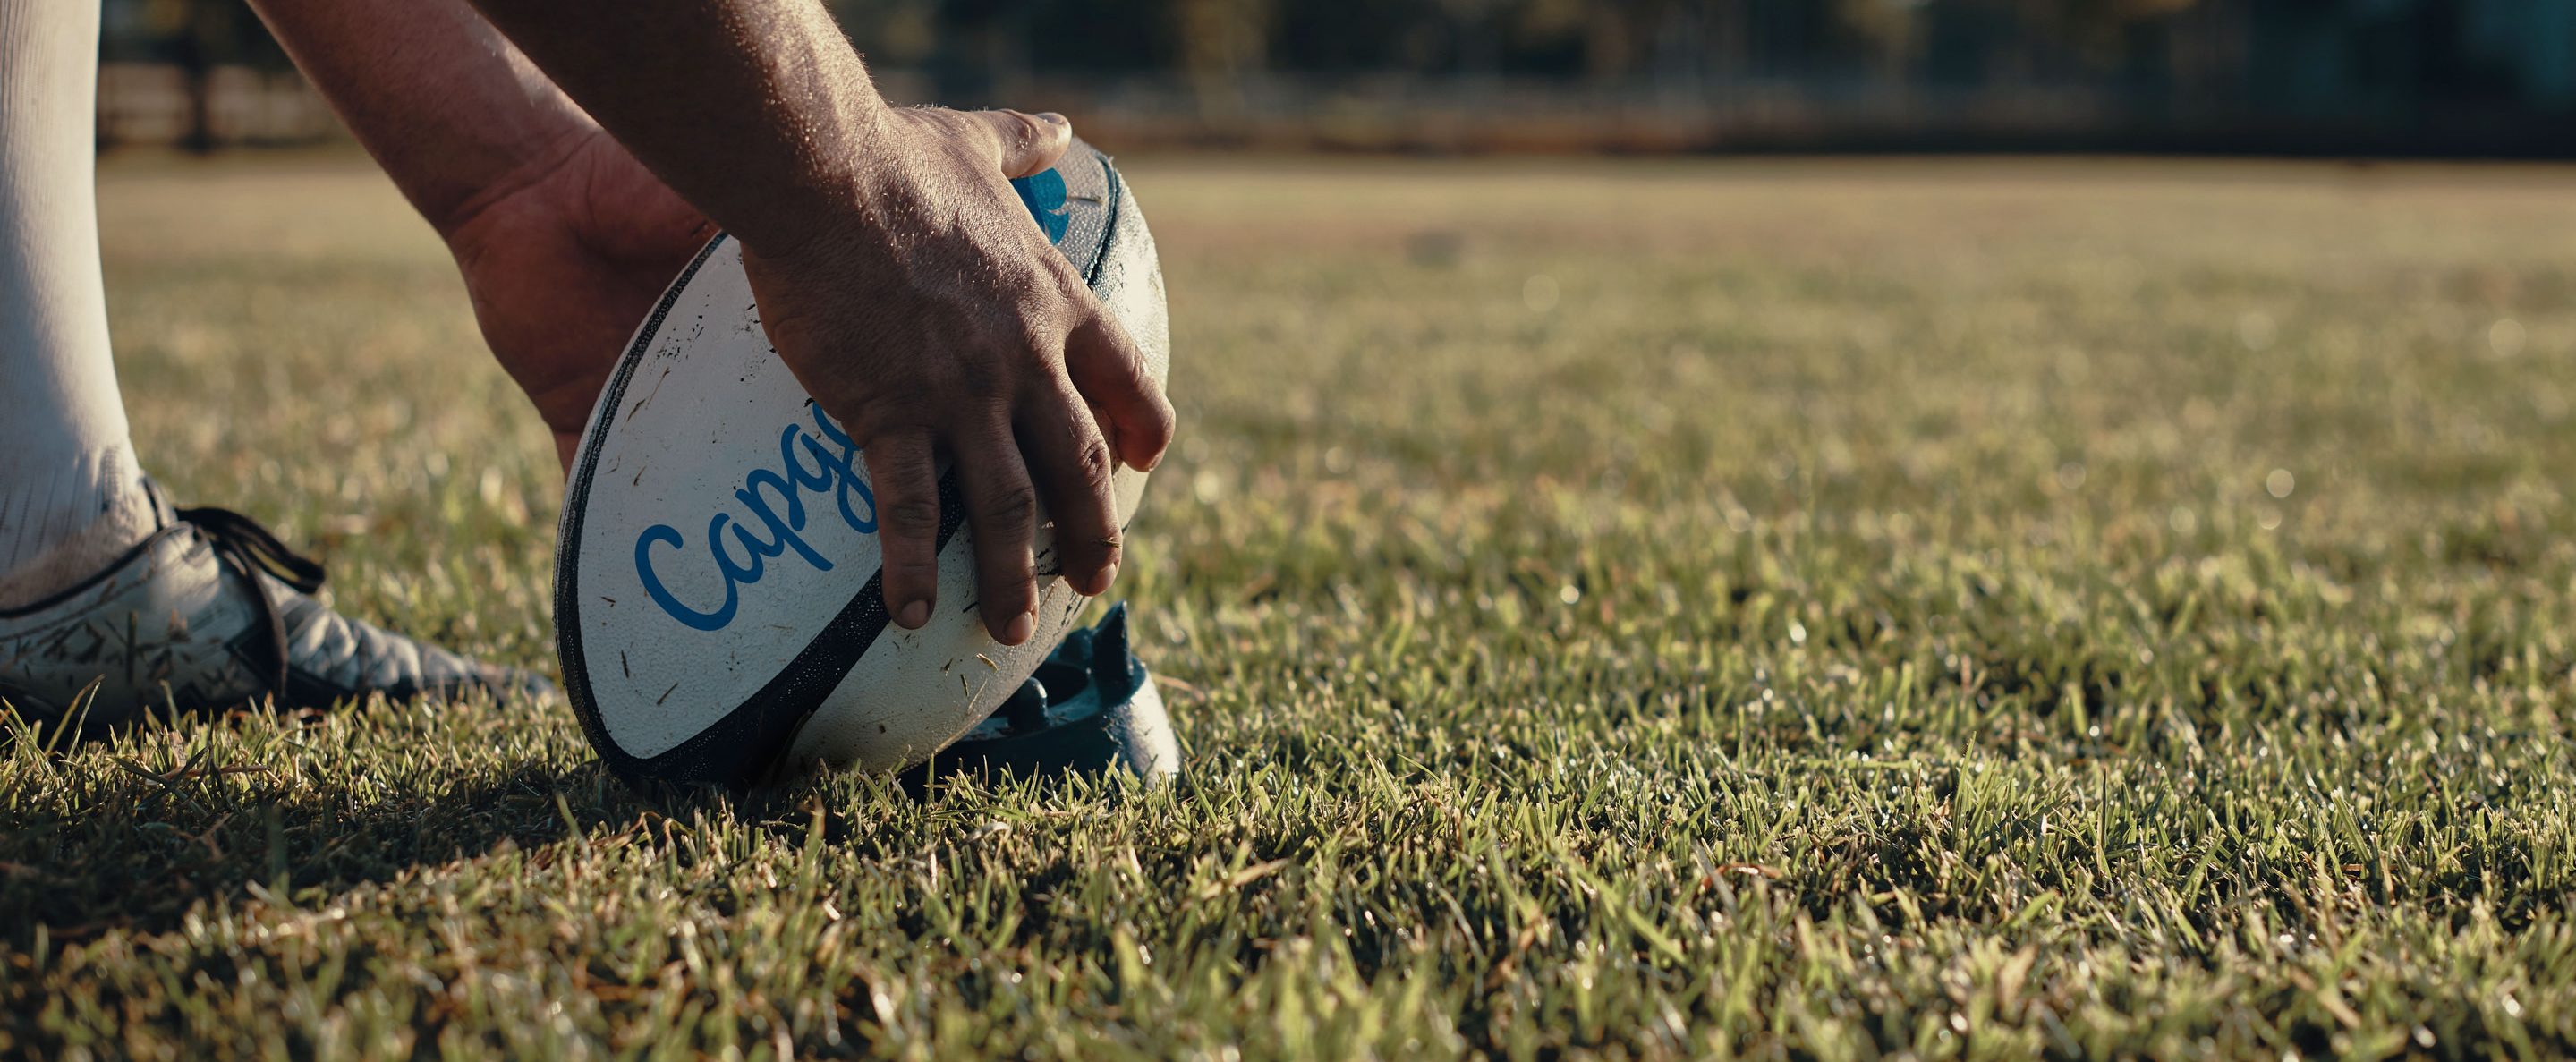 Capgemini_Passion-for-Rugby